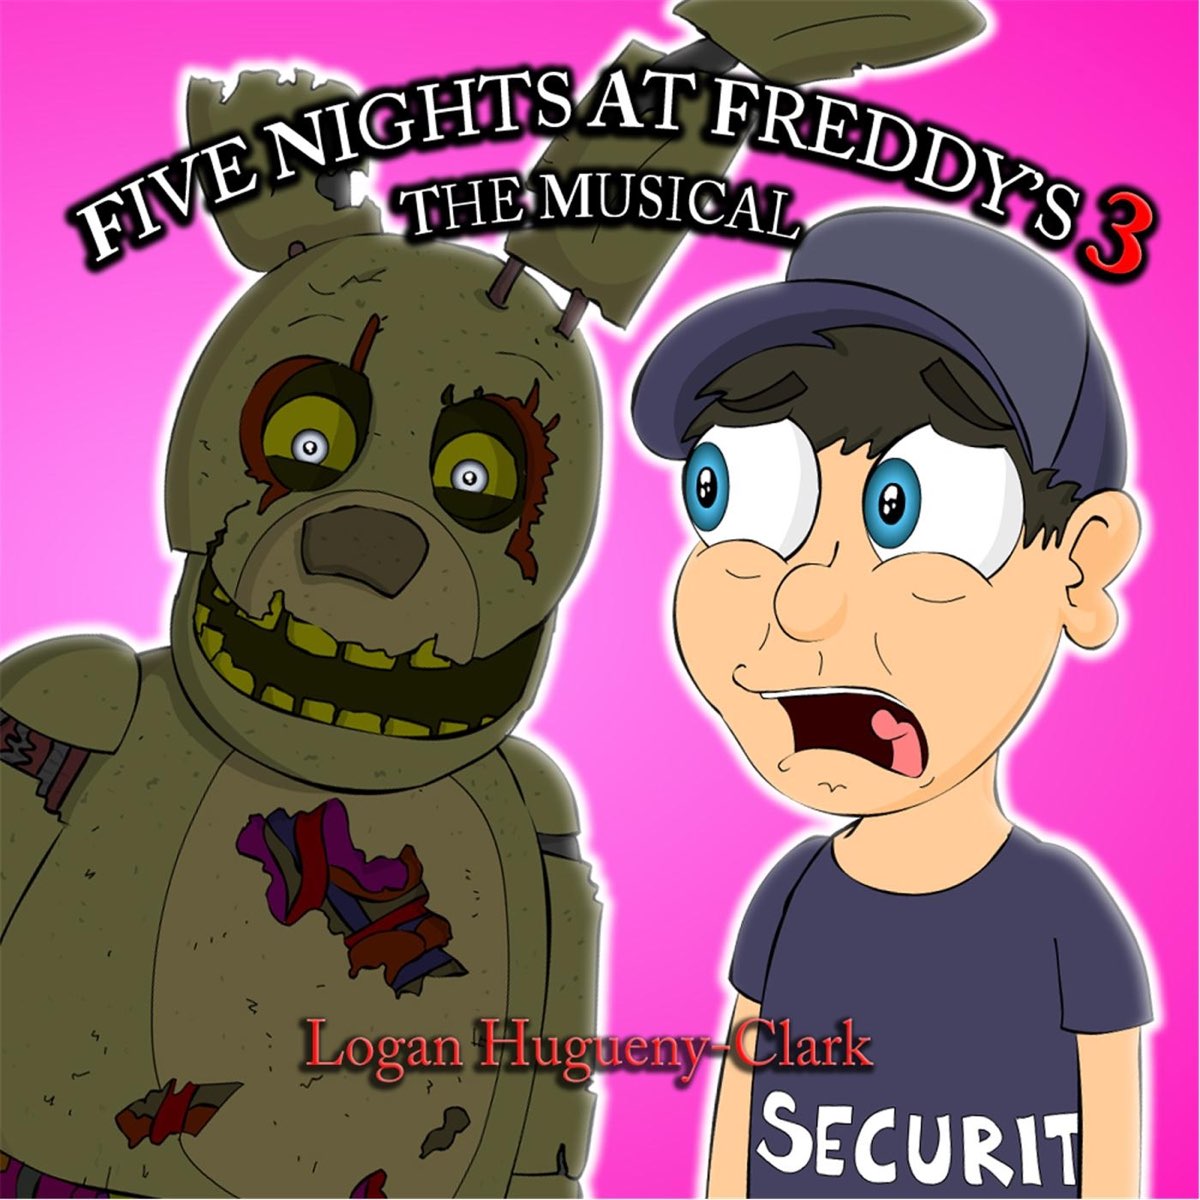 Five Nights at Freddy's 3 the Musical by Logan Hugueny-Clark (Single,  Electropop): Reviews, Ratings, Credits, Song list - Rate Your Music